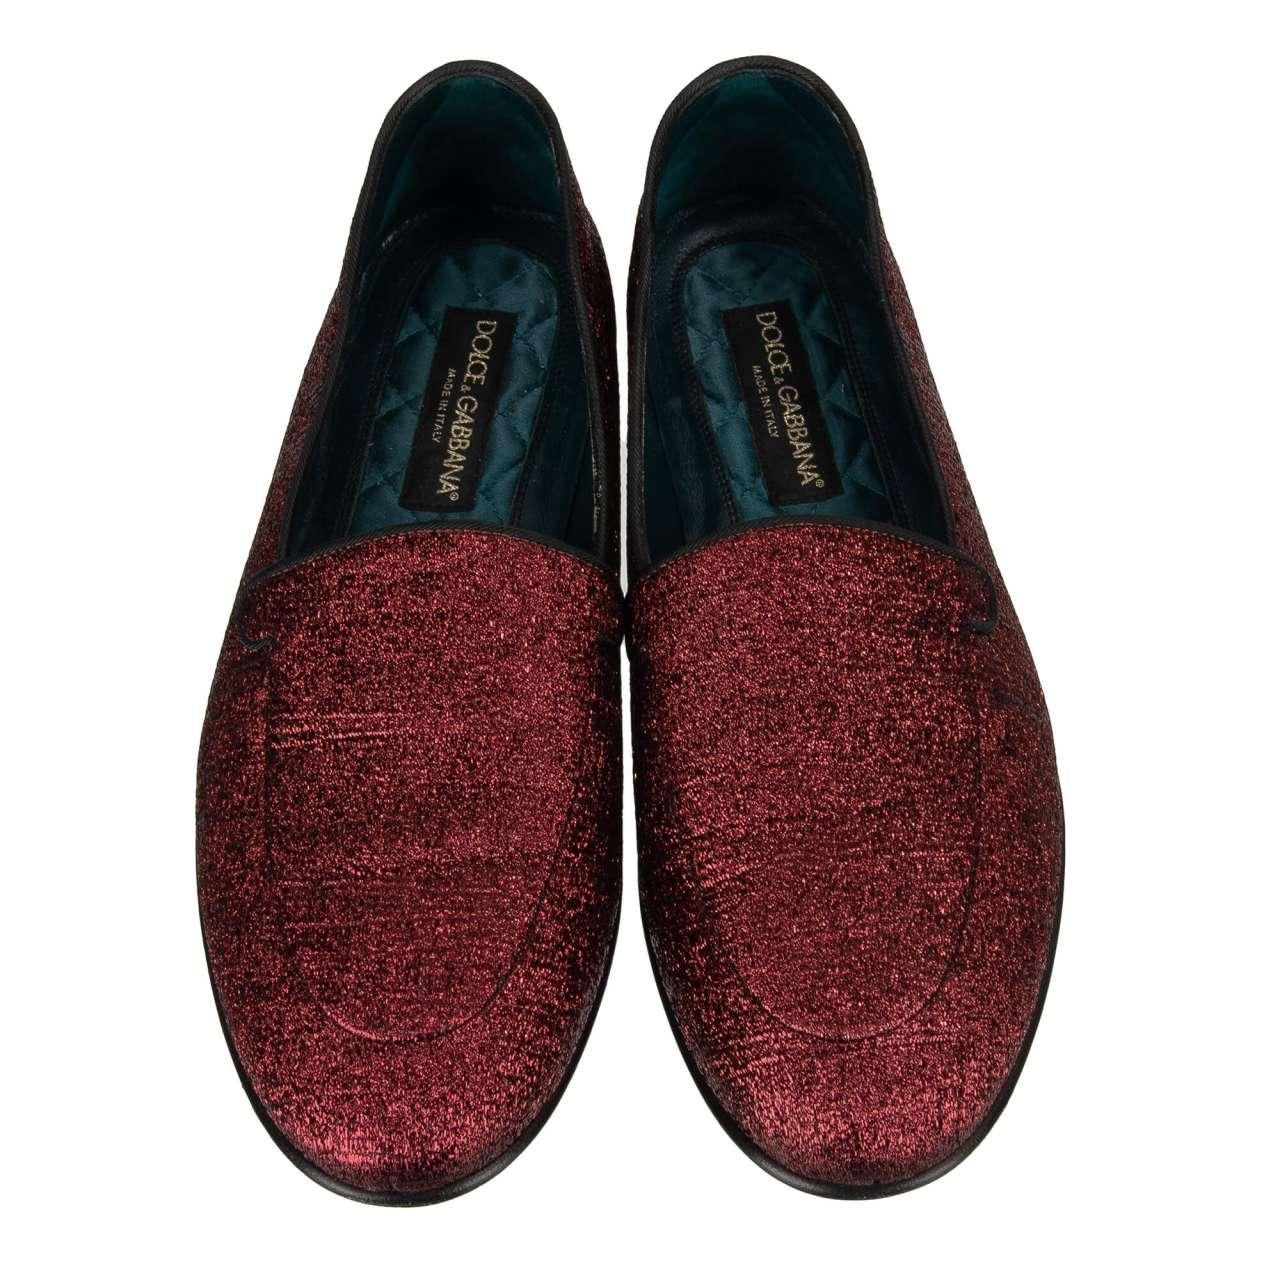 - Lurex fabric loafer shoes YOUNG POPE with DG metal logo in bordeaux by DOLCE & GABBANA - MADE IN ITALY - New with Box - Model: A50197-AV743-80308 - Material: 57% Polyester, 29% Viscose, 14% Lurex - Sole: Leather - Color: Bordeaux - Leather and